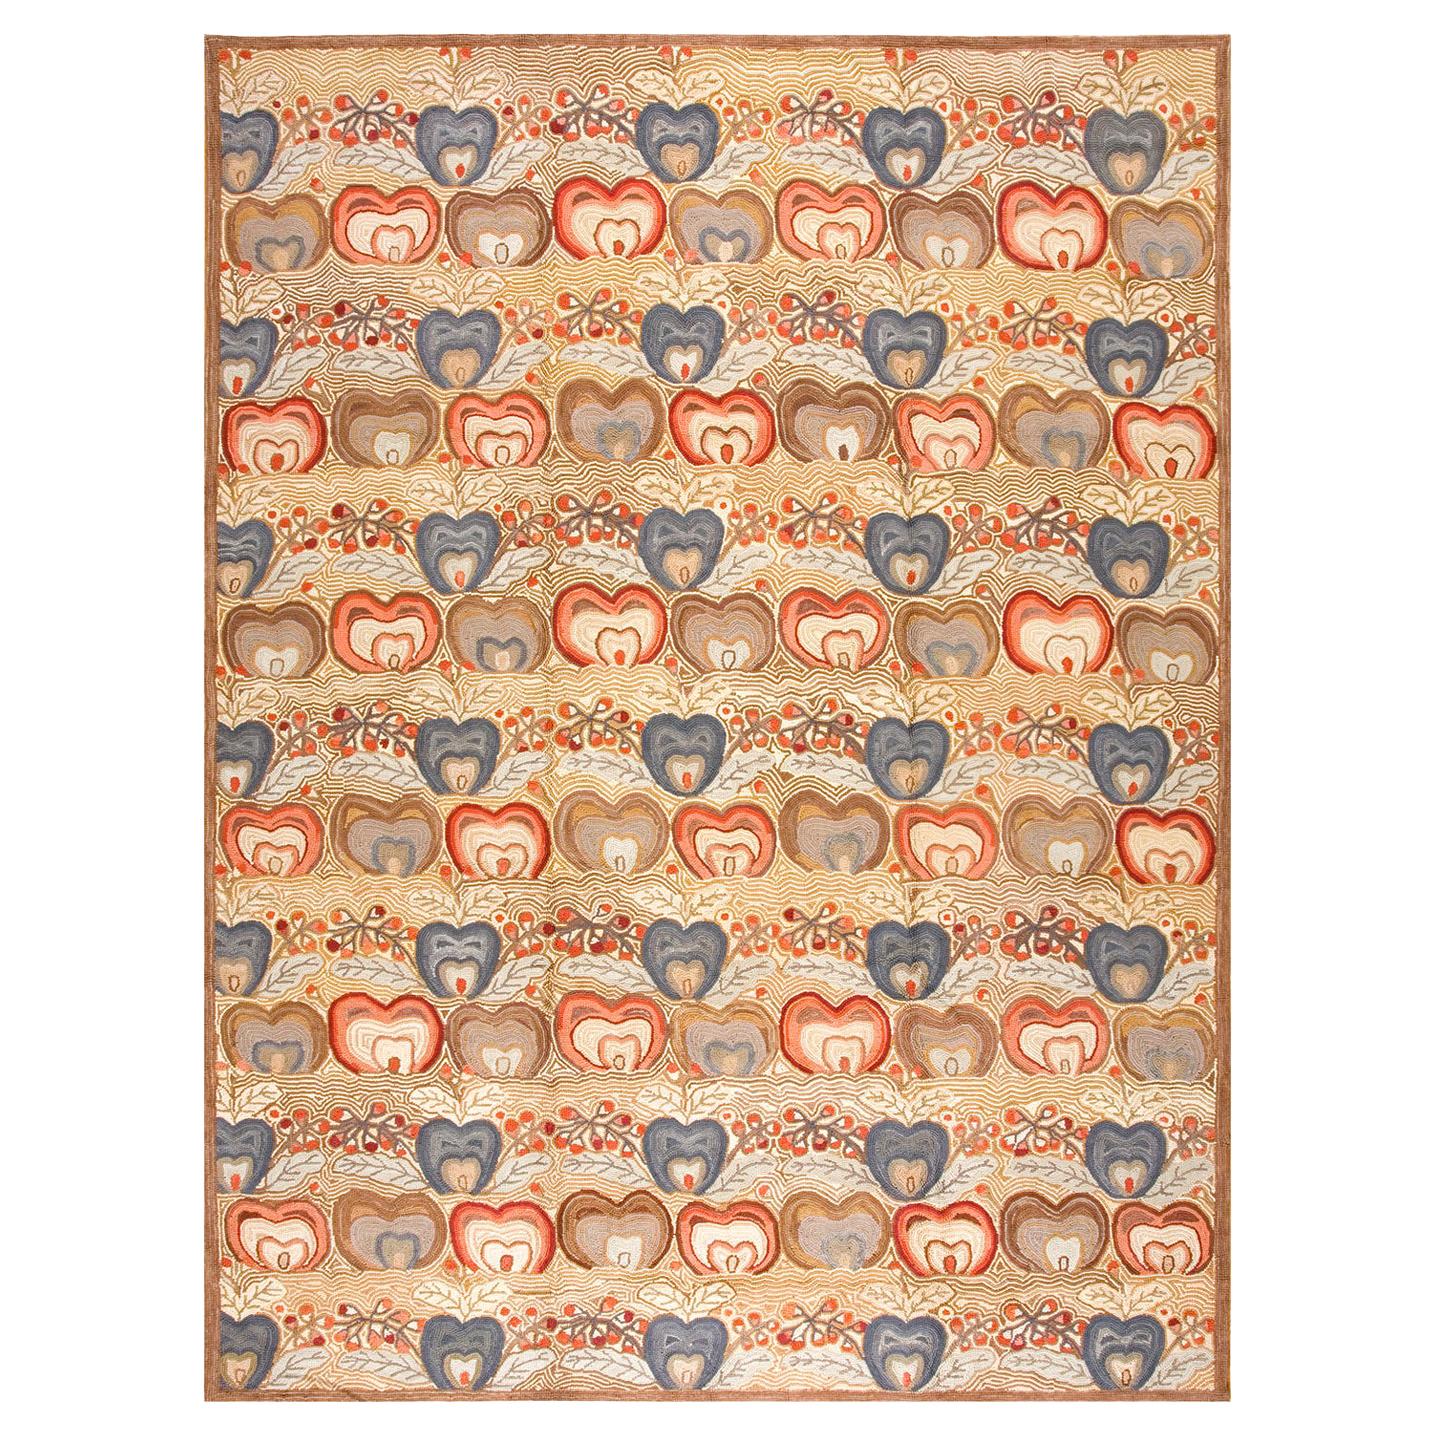 Contemporary Handwoven Cotton Hooked Rug ( 6' x 9' - 183 x 274 cm ) For Sale